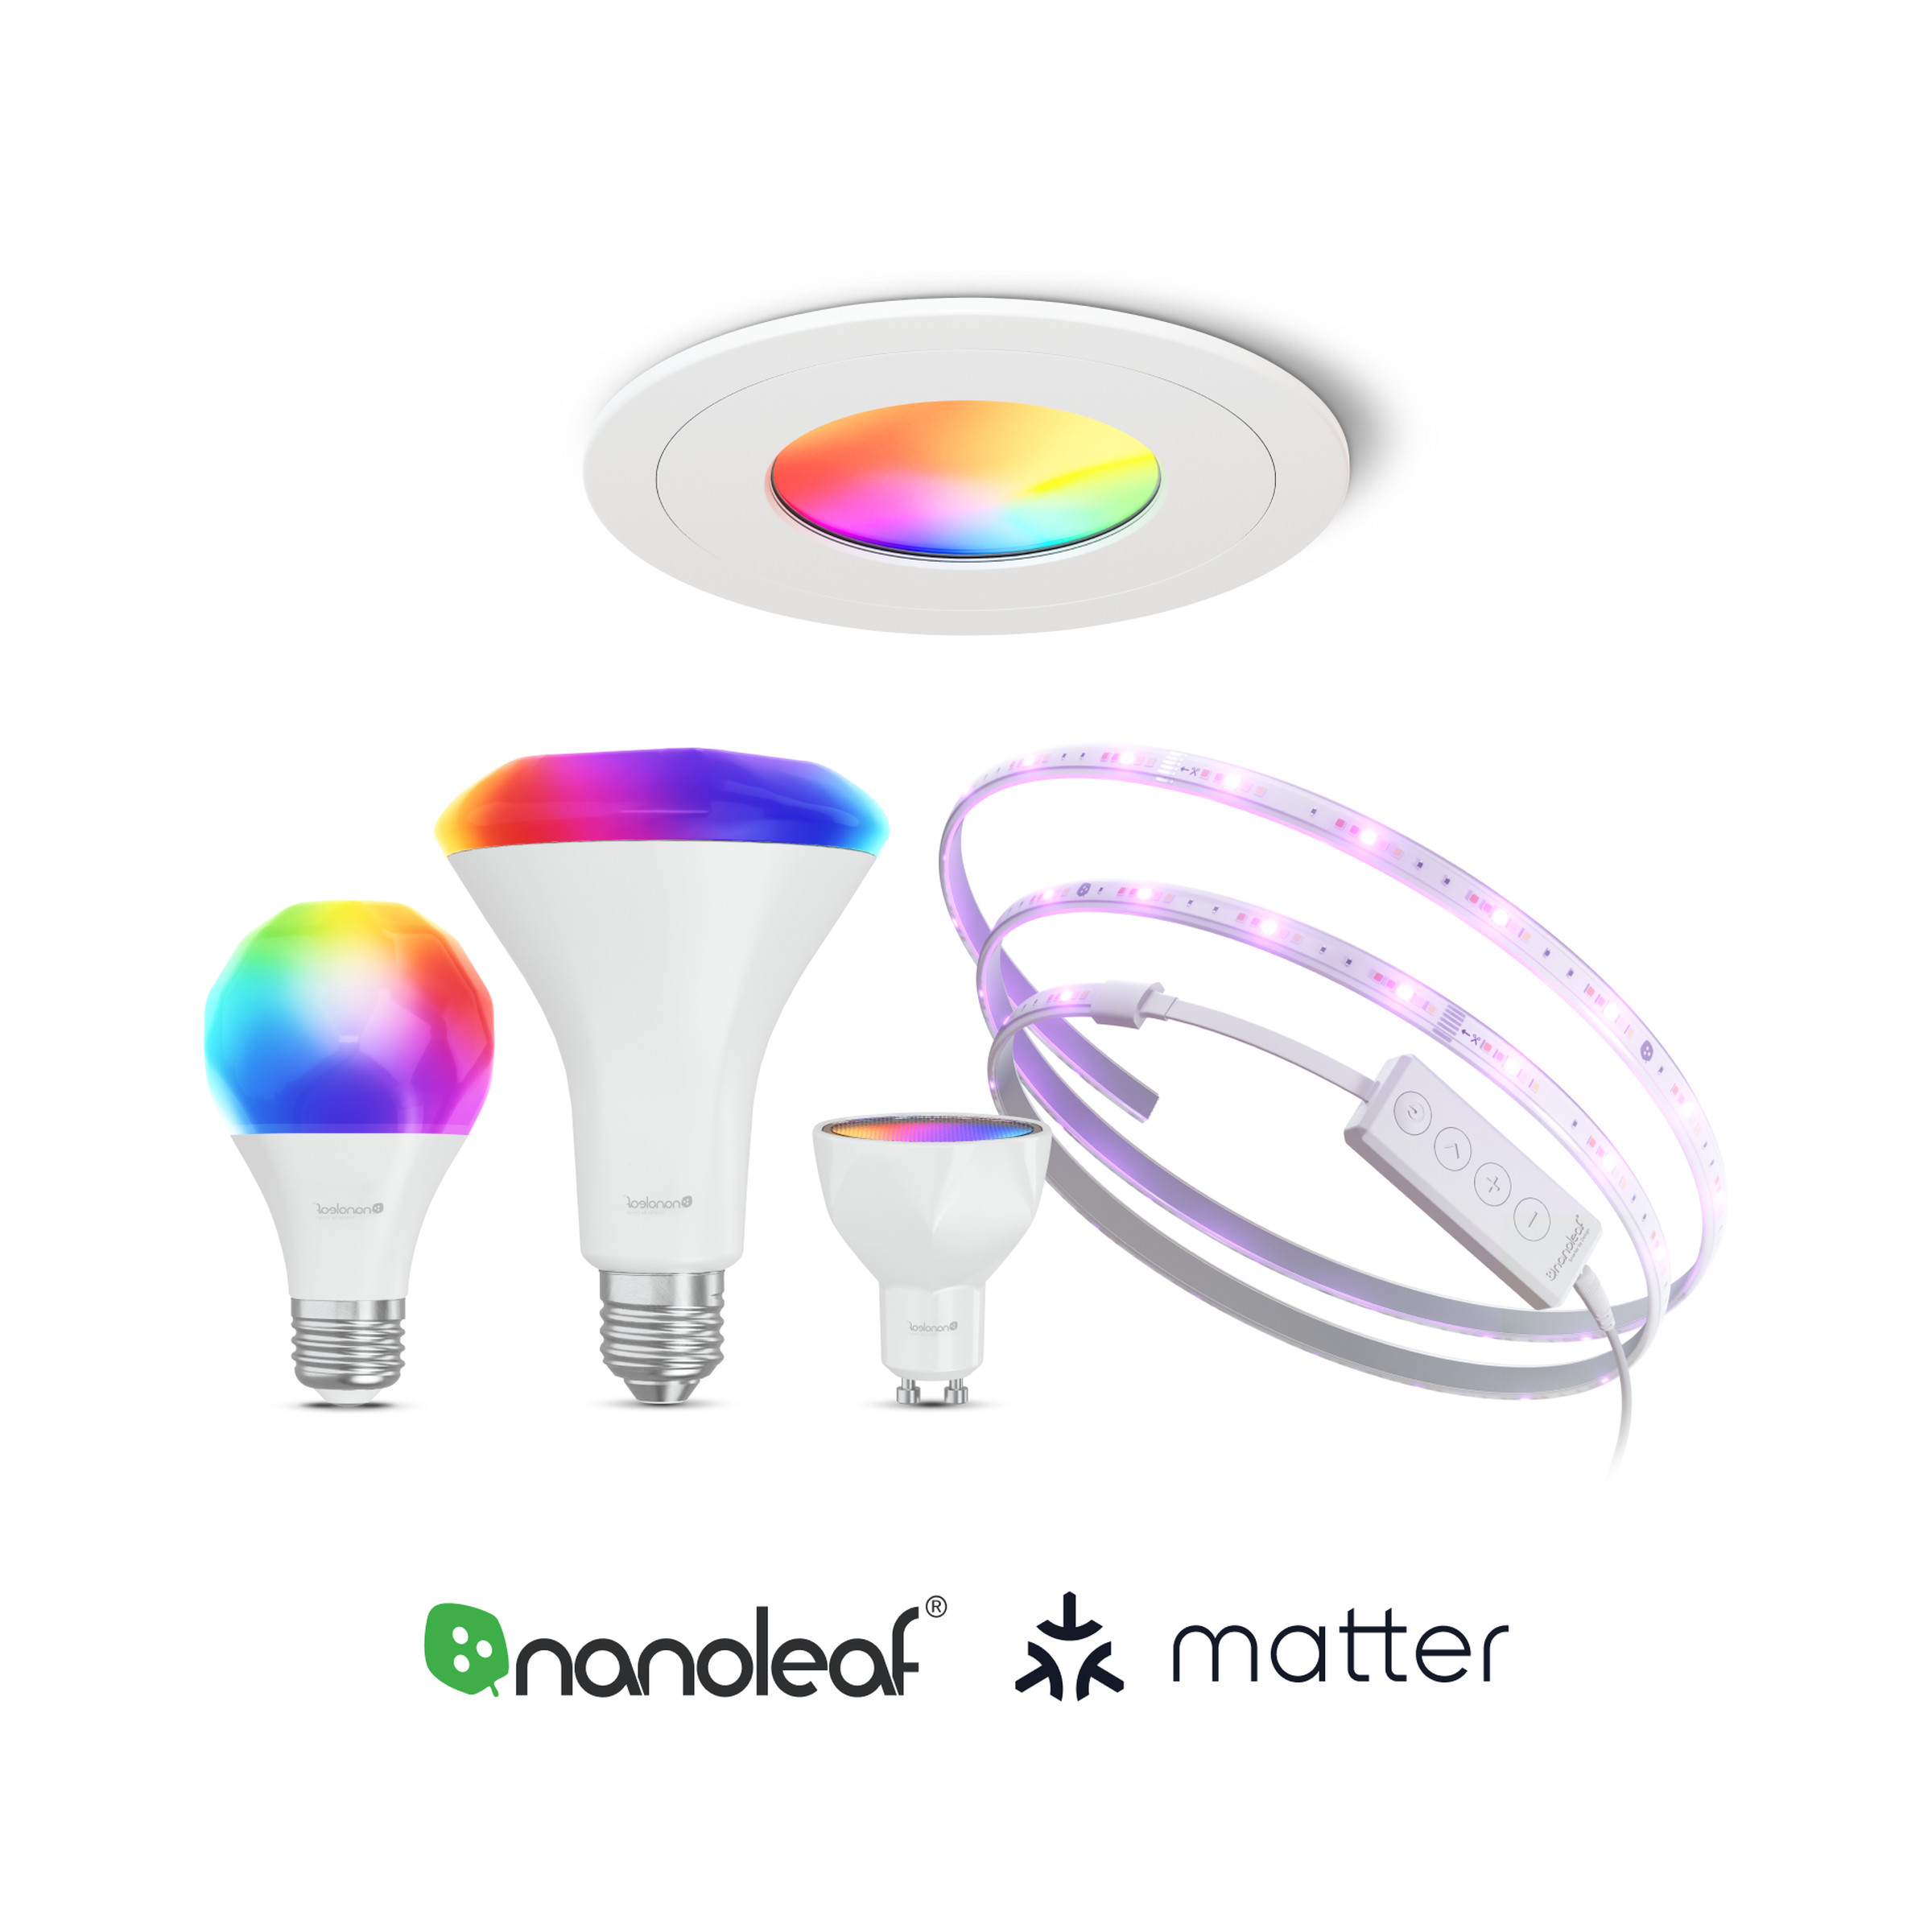 The Nanoleaf Essentials line with Matter will arrive in Q1. The company has also committed to upgrading its existing lighting panels to Matter.